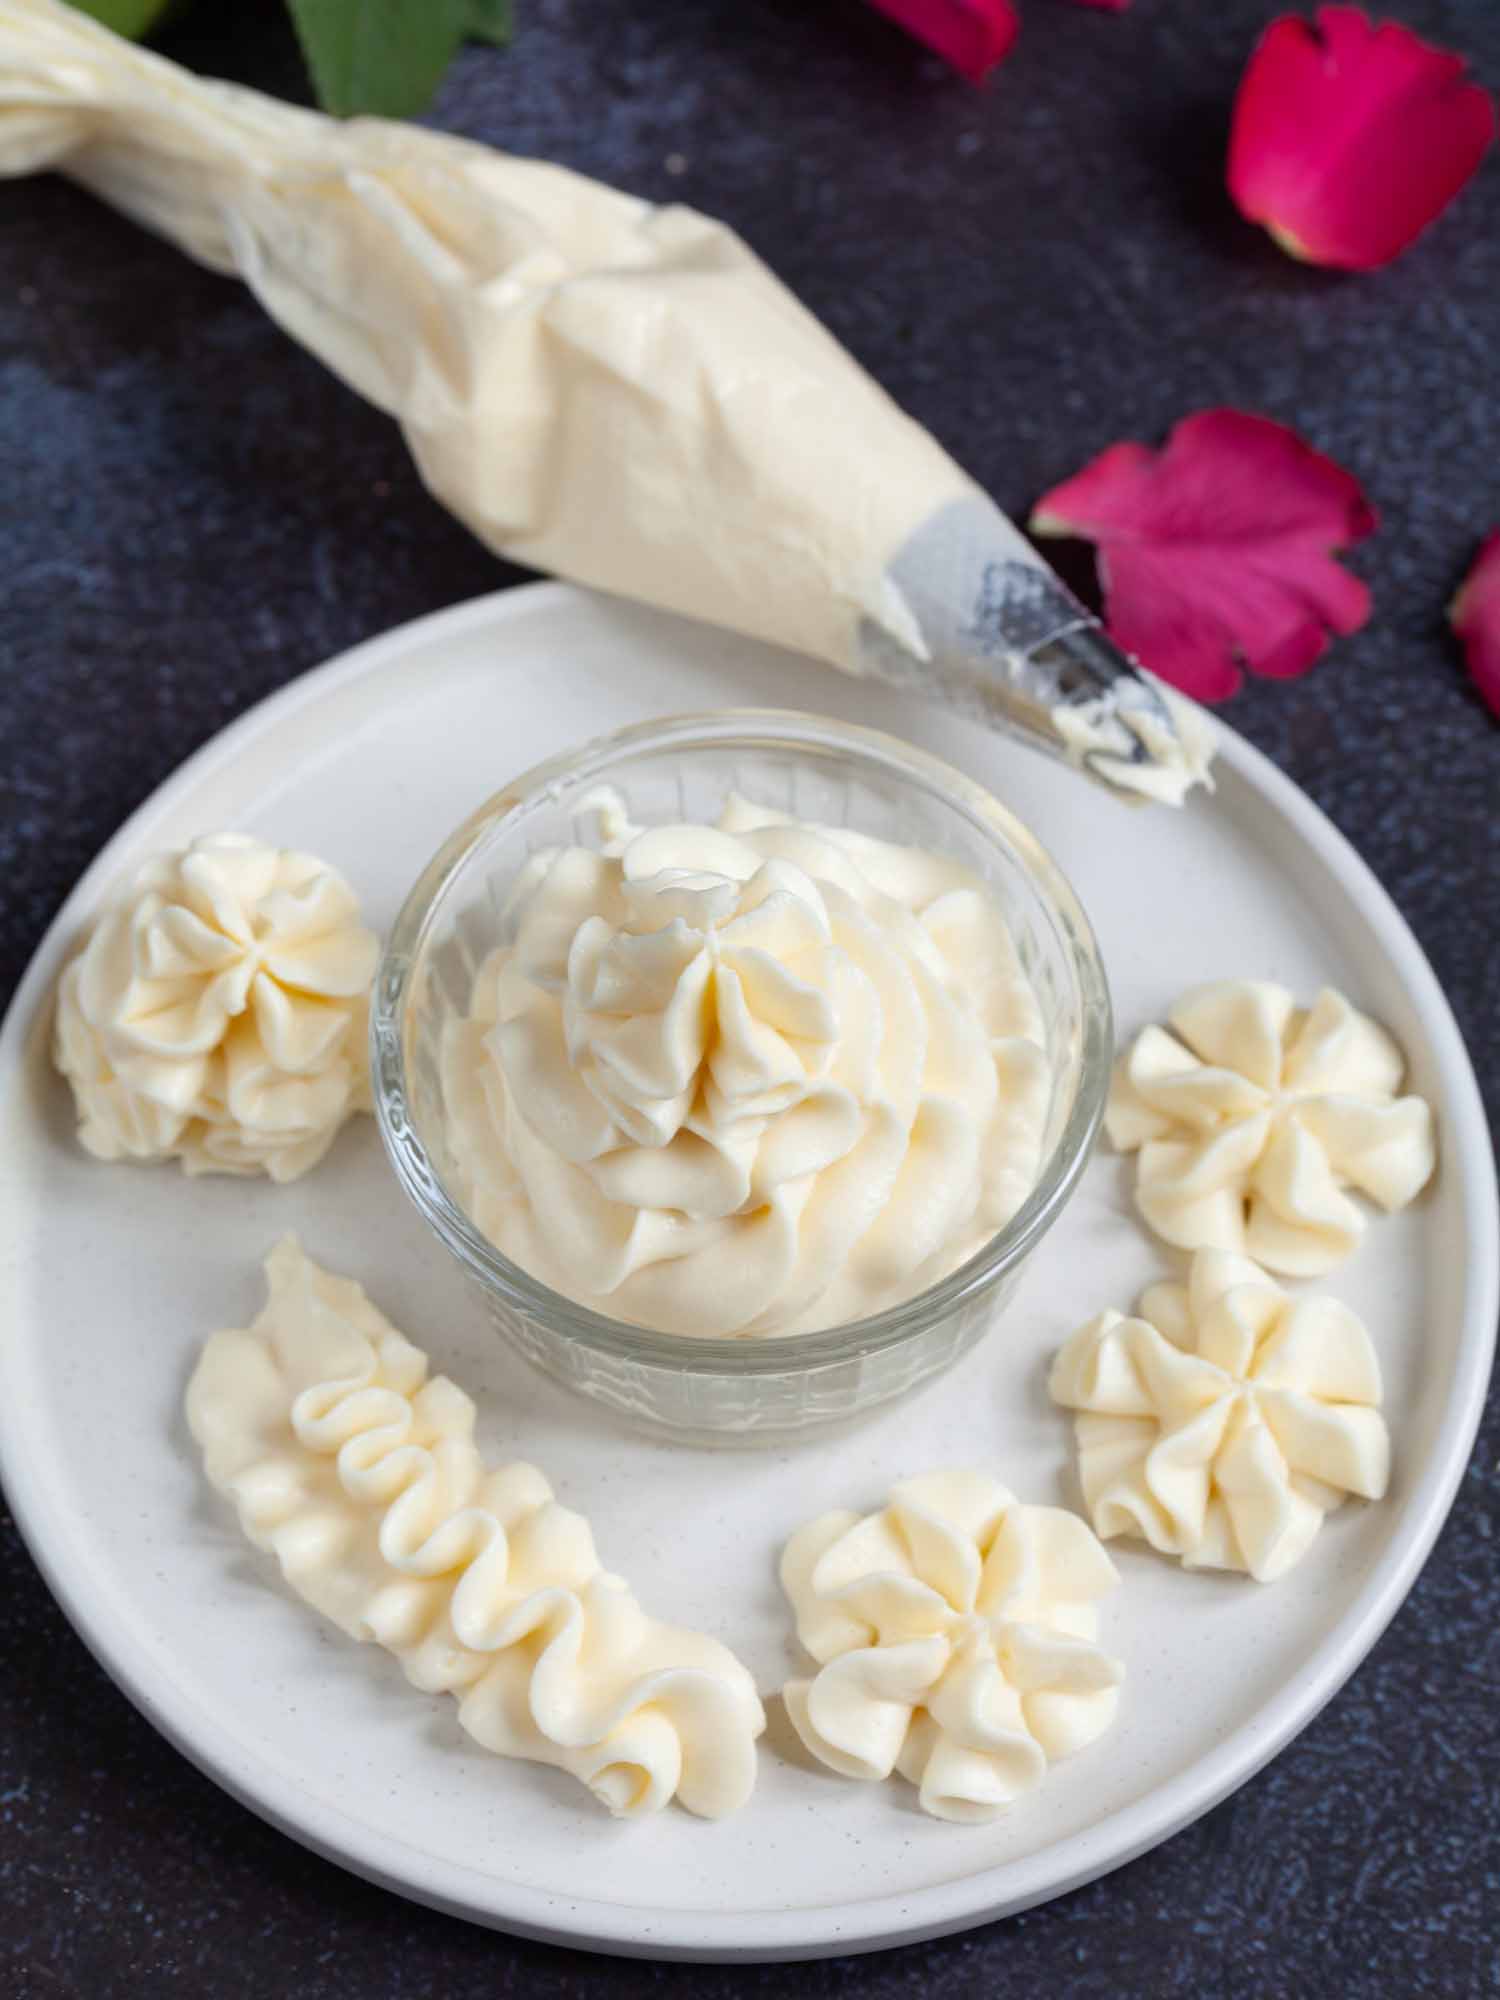 Goat cheese buttercream frosting